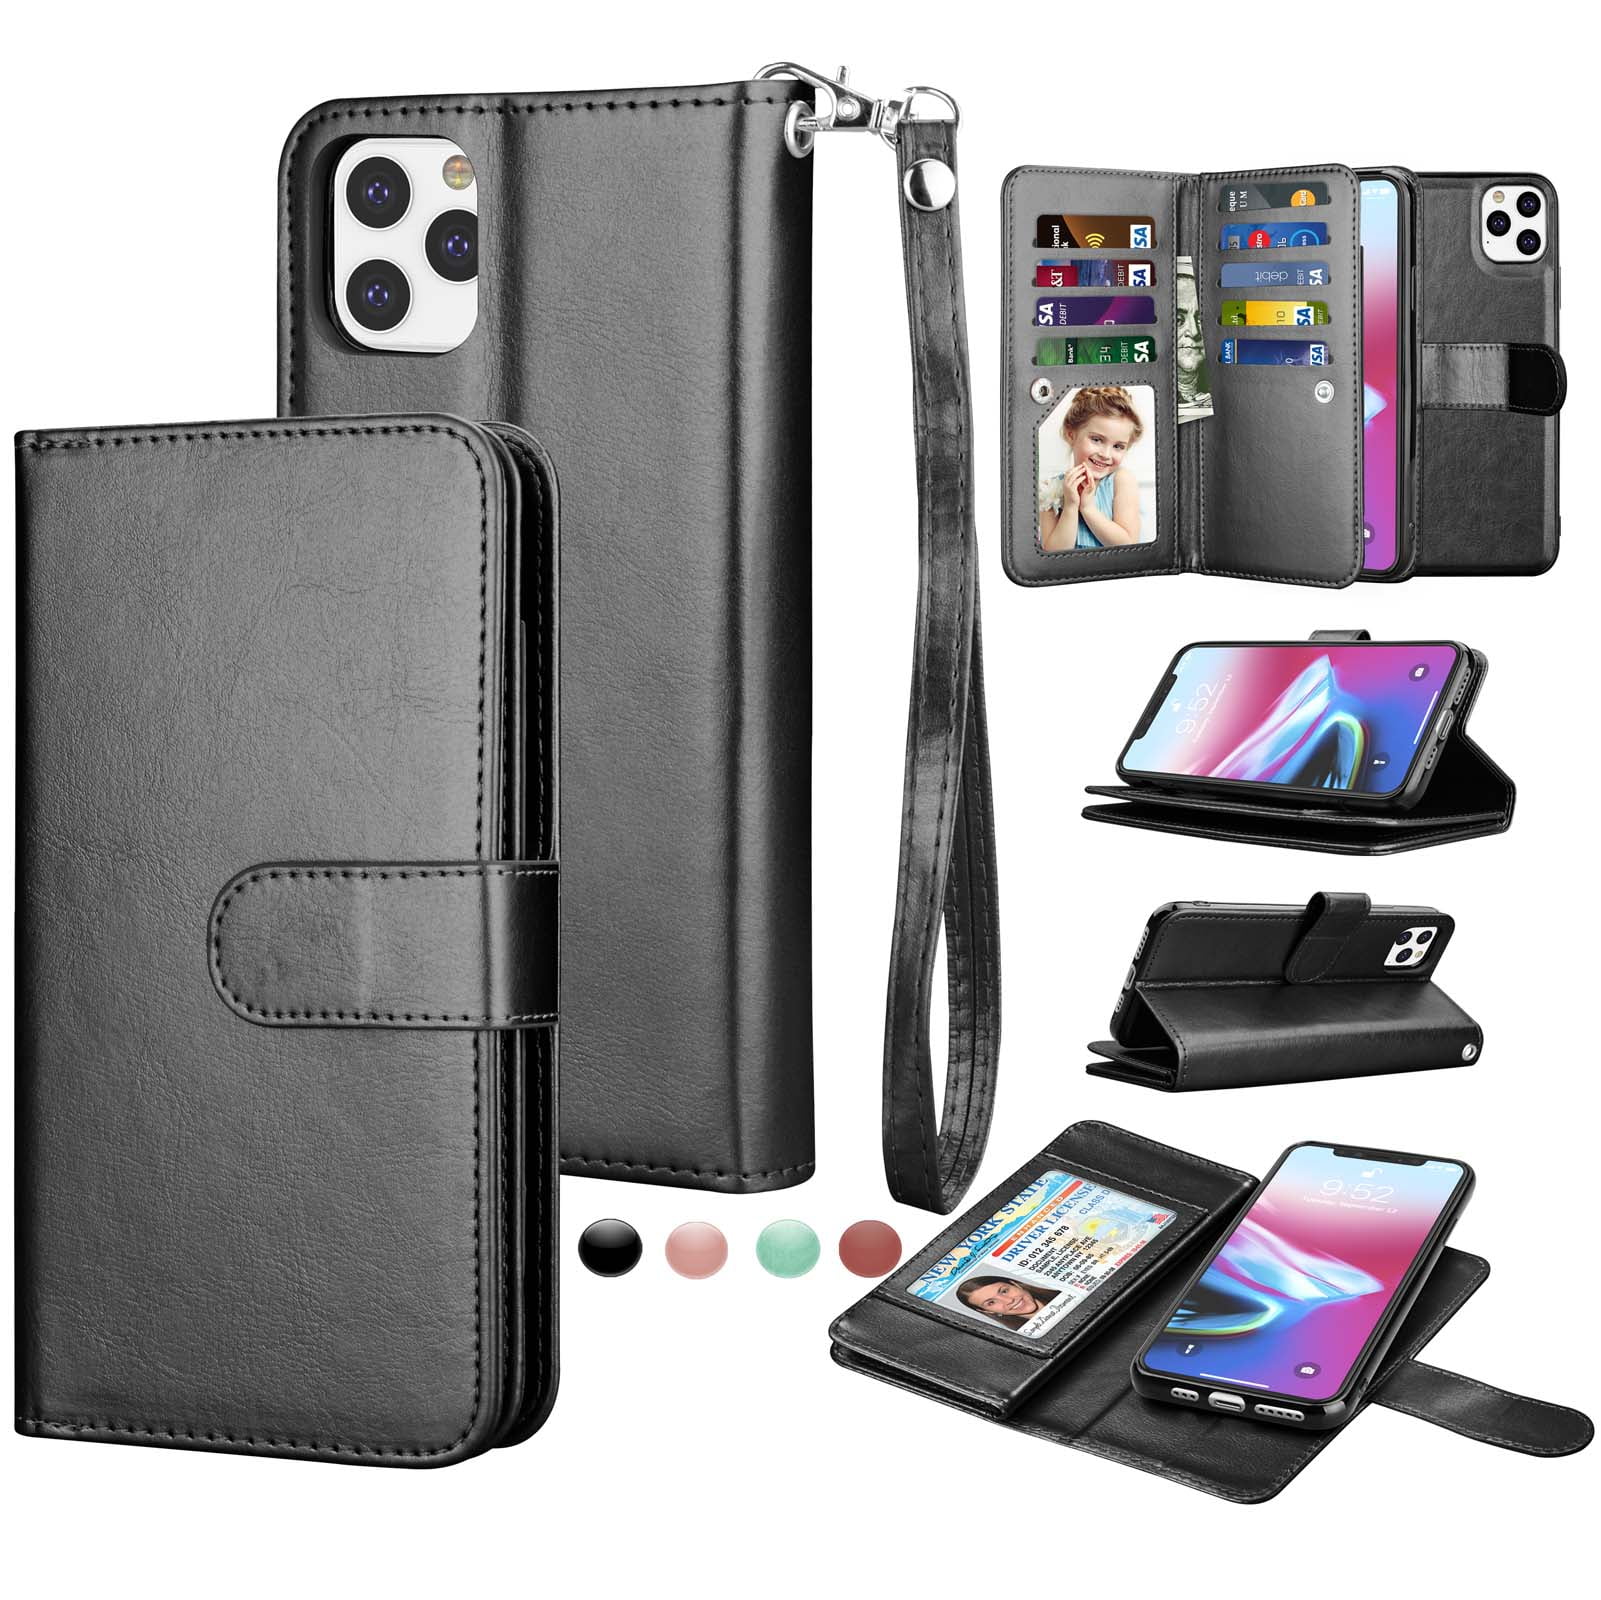 Durable Soft Wallet Cover for iPhone 11 Pro Max PU Leather Flip Case for iPhone 11 Pro Max